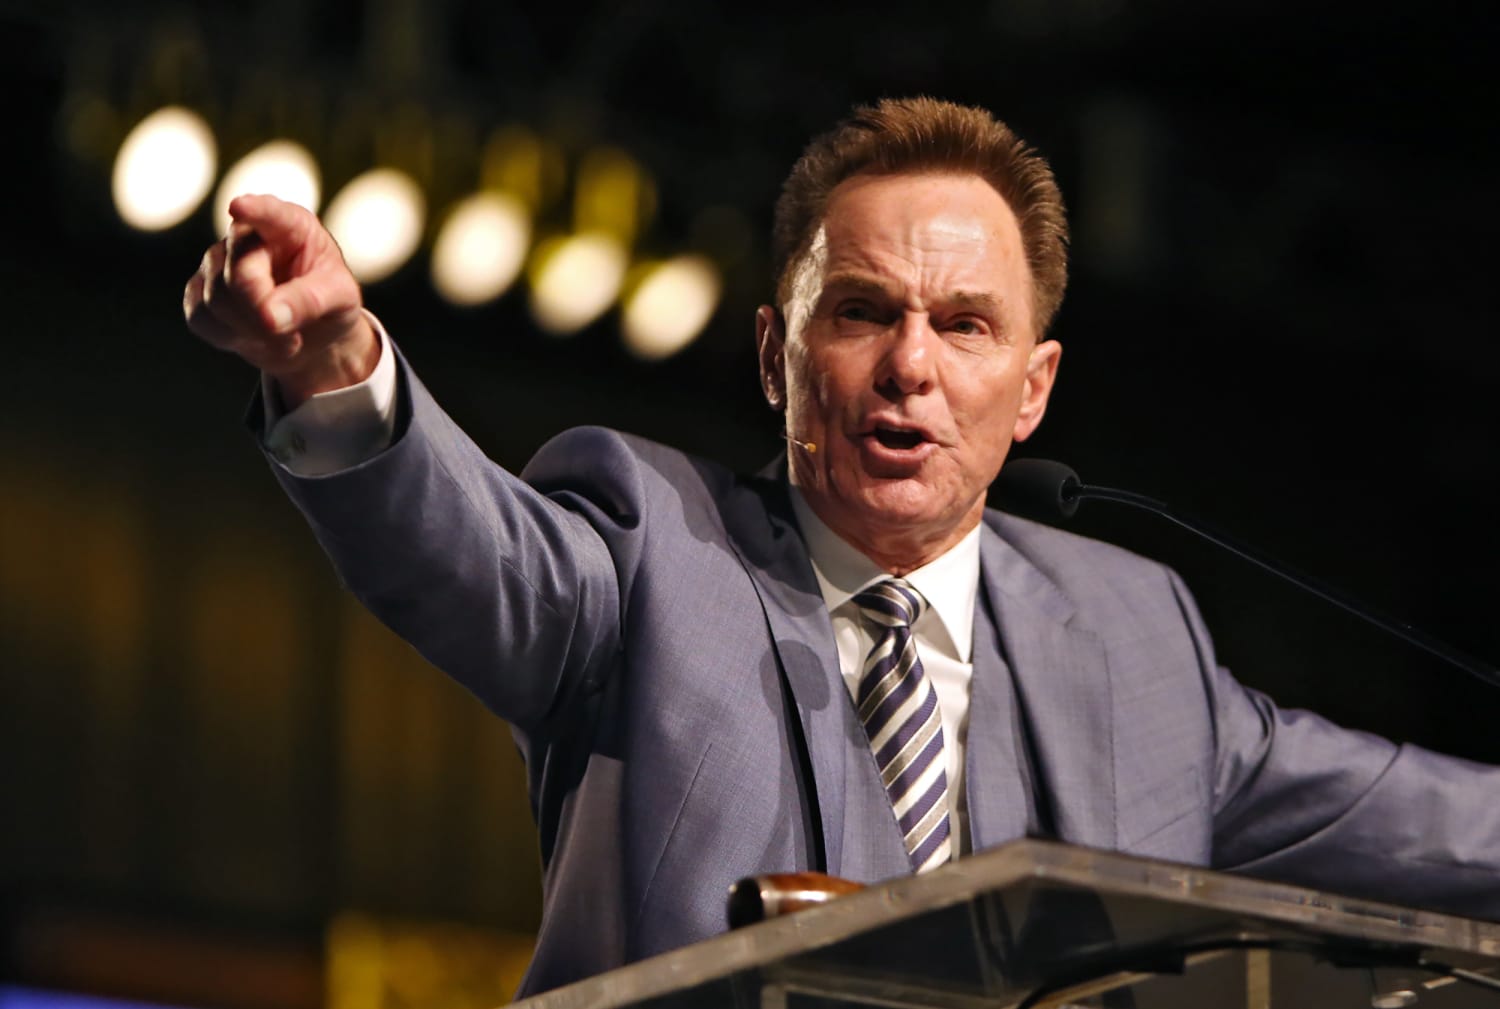 Southern Baptist Convention CEO Ronnie Floyd resigns as the old guard finally crumbles image pic